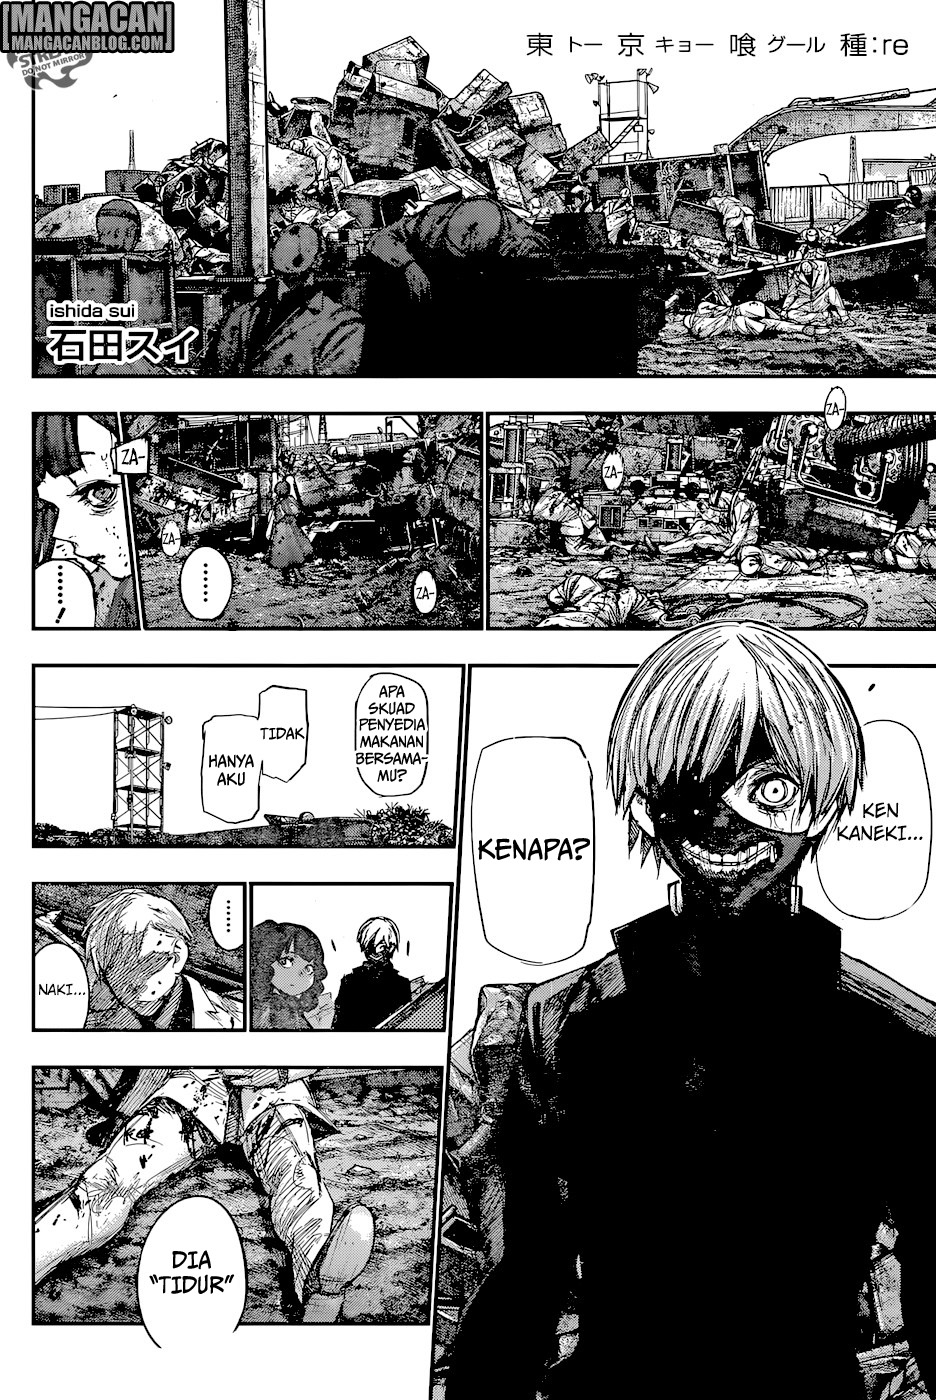 Tokyo Ghoul:re Chapter 143